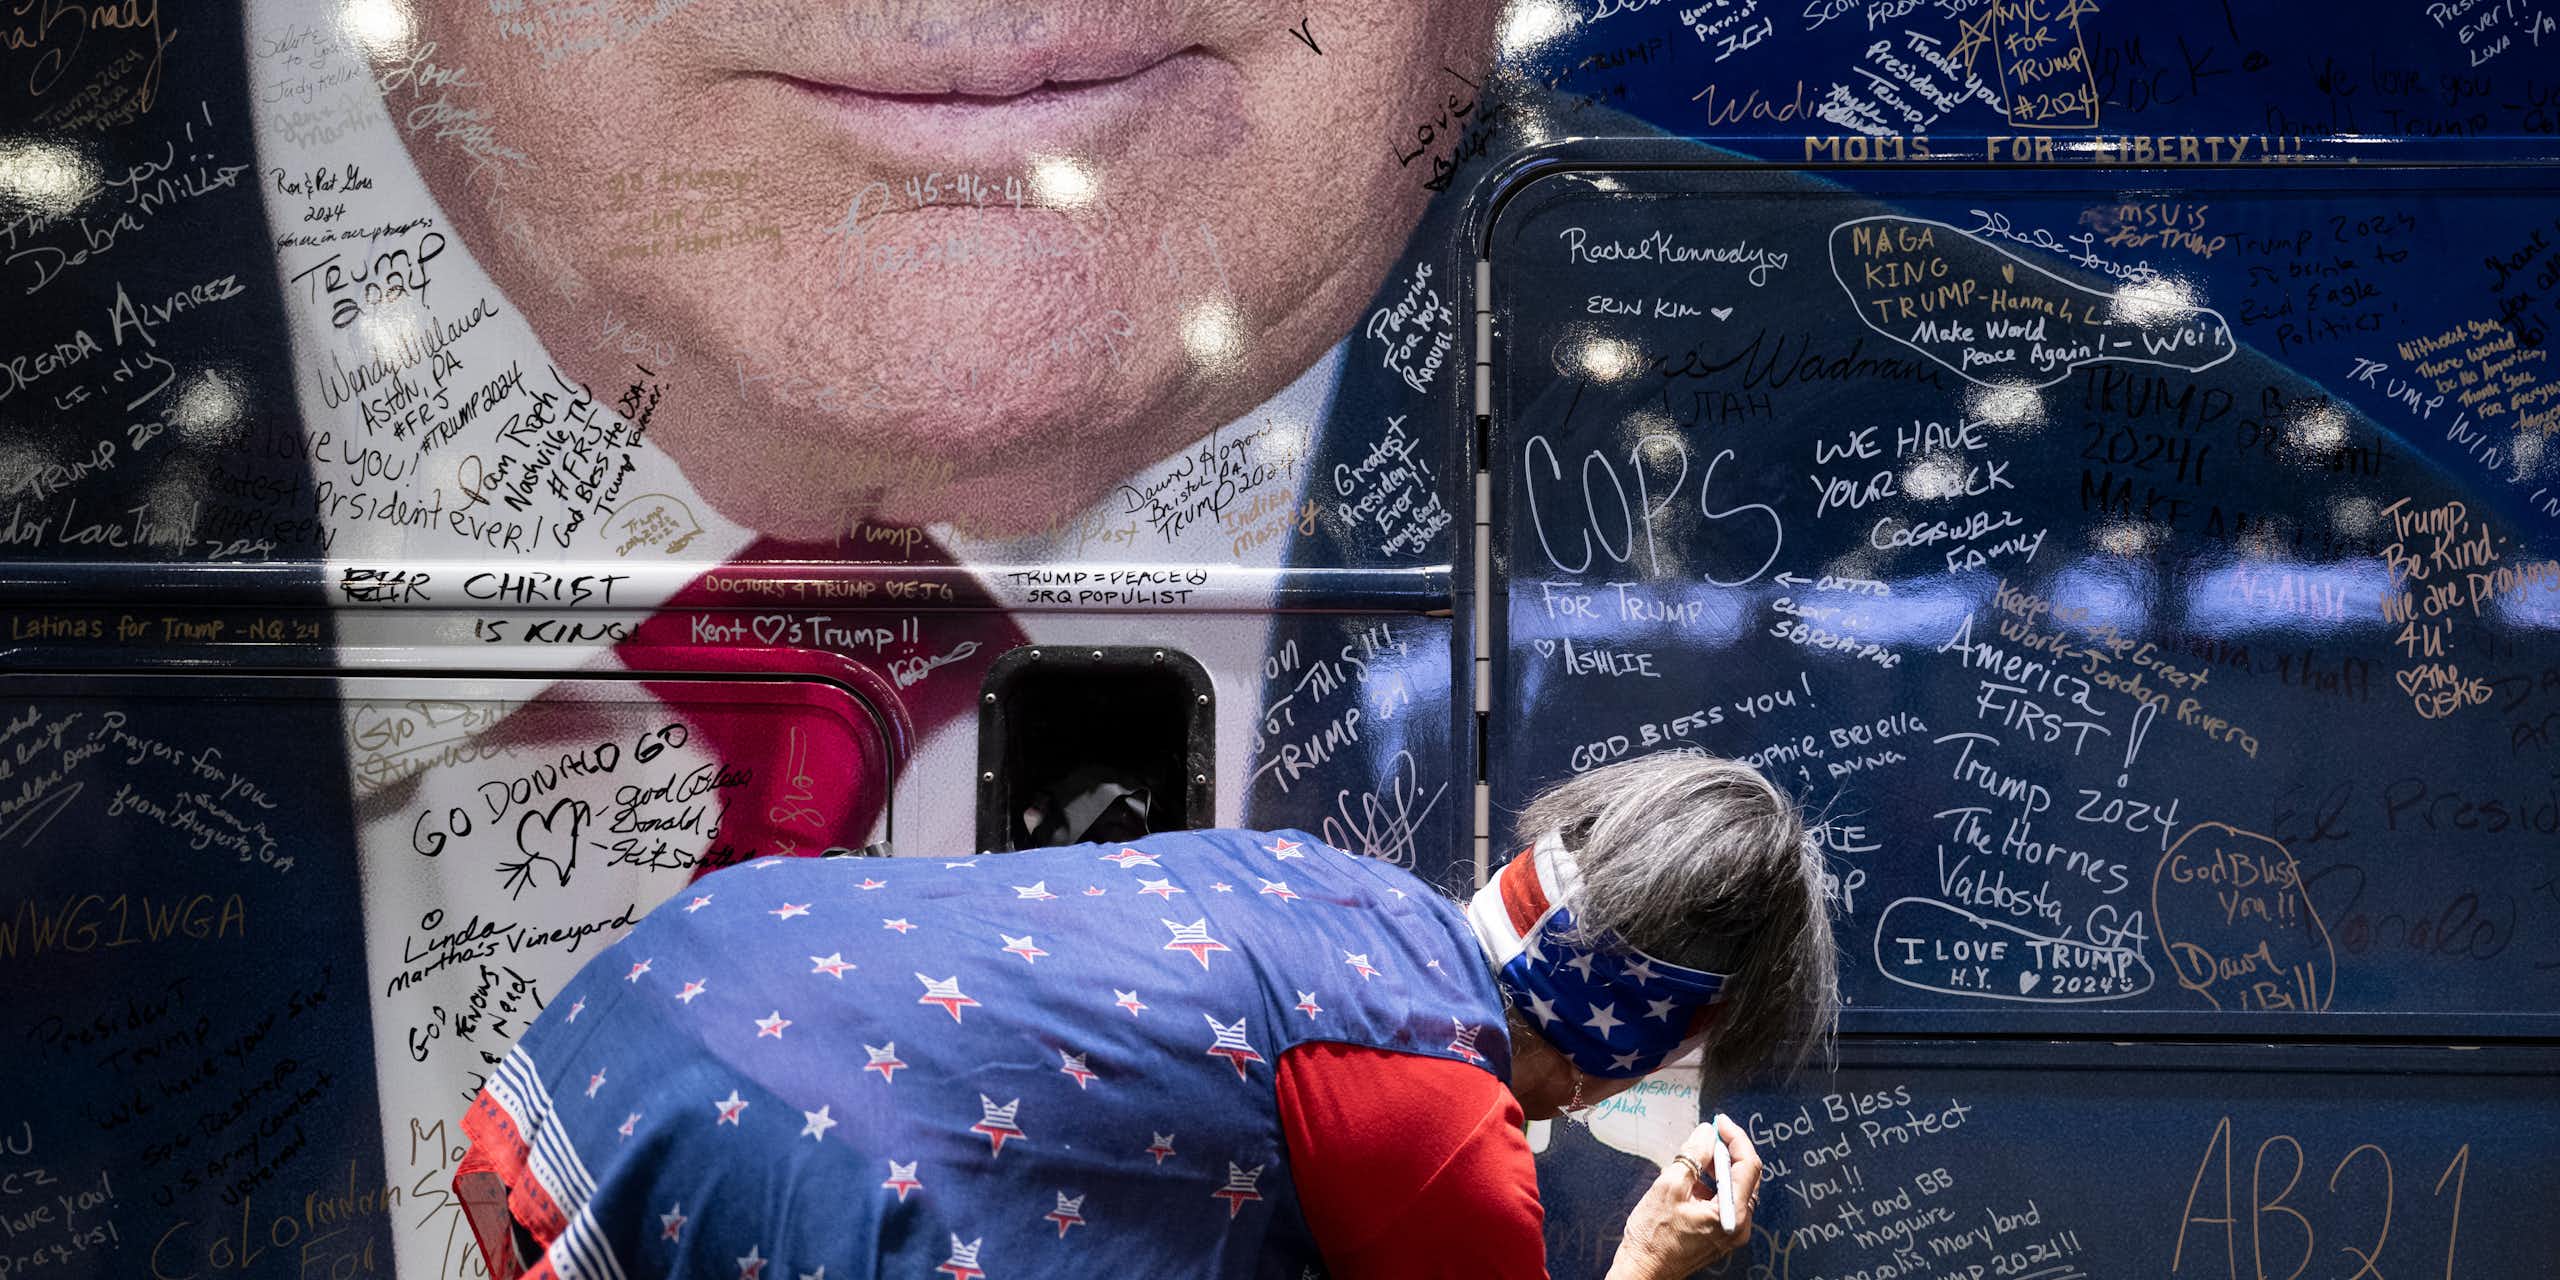 A person wearing a blue shirt with red and white stars and an American flag bandana bends down to write something on a large blue bus, which shows the bottom half of Donald Trump's face